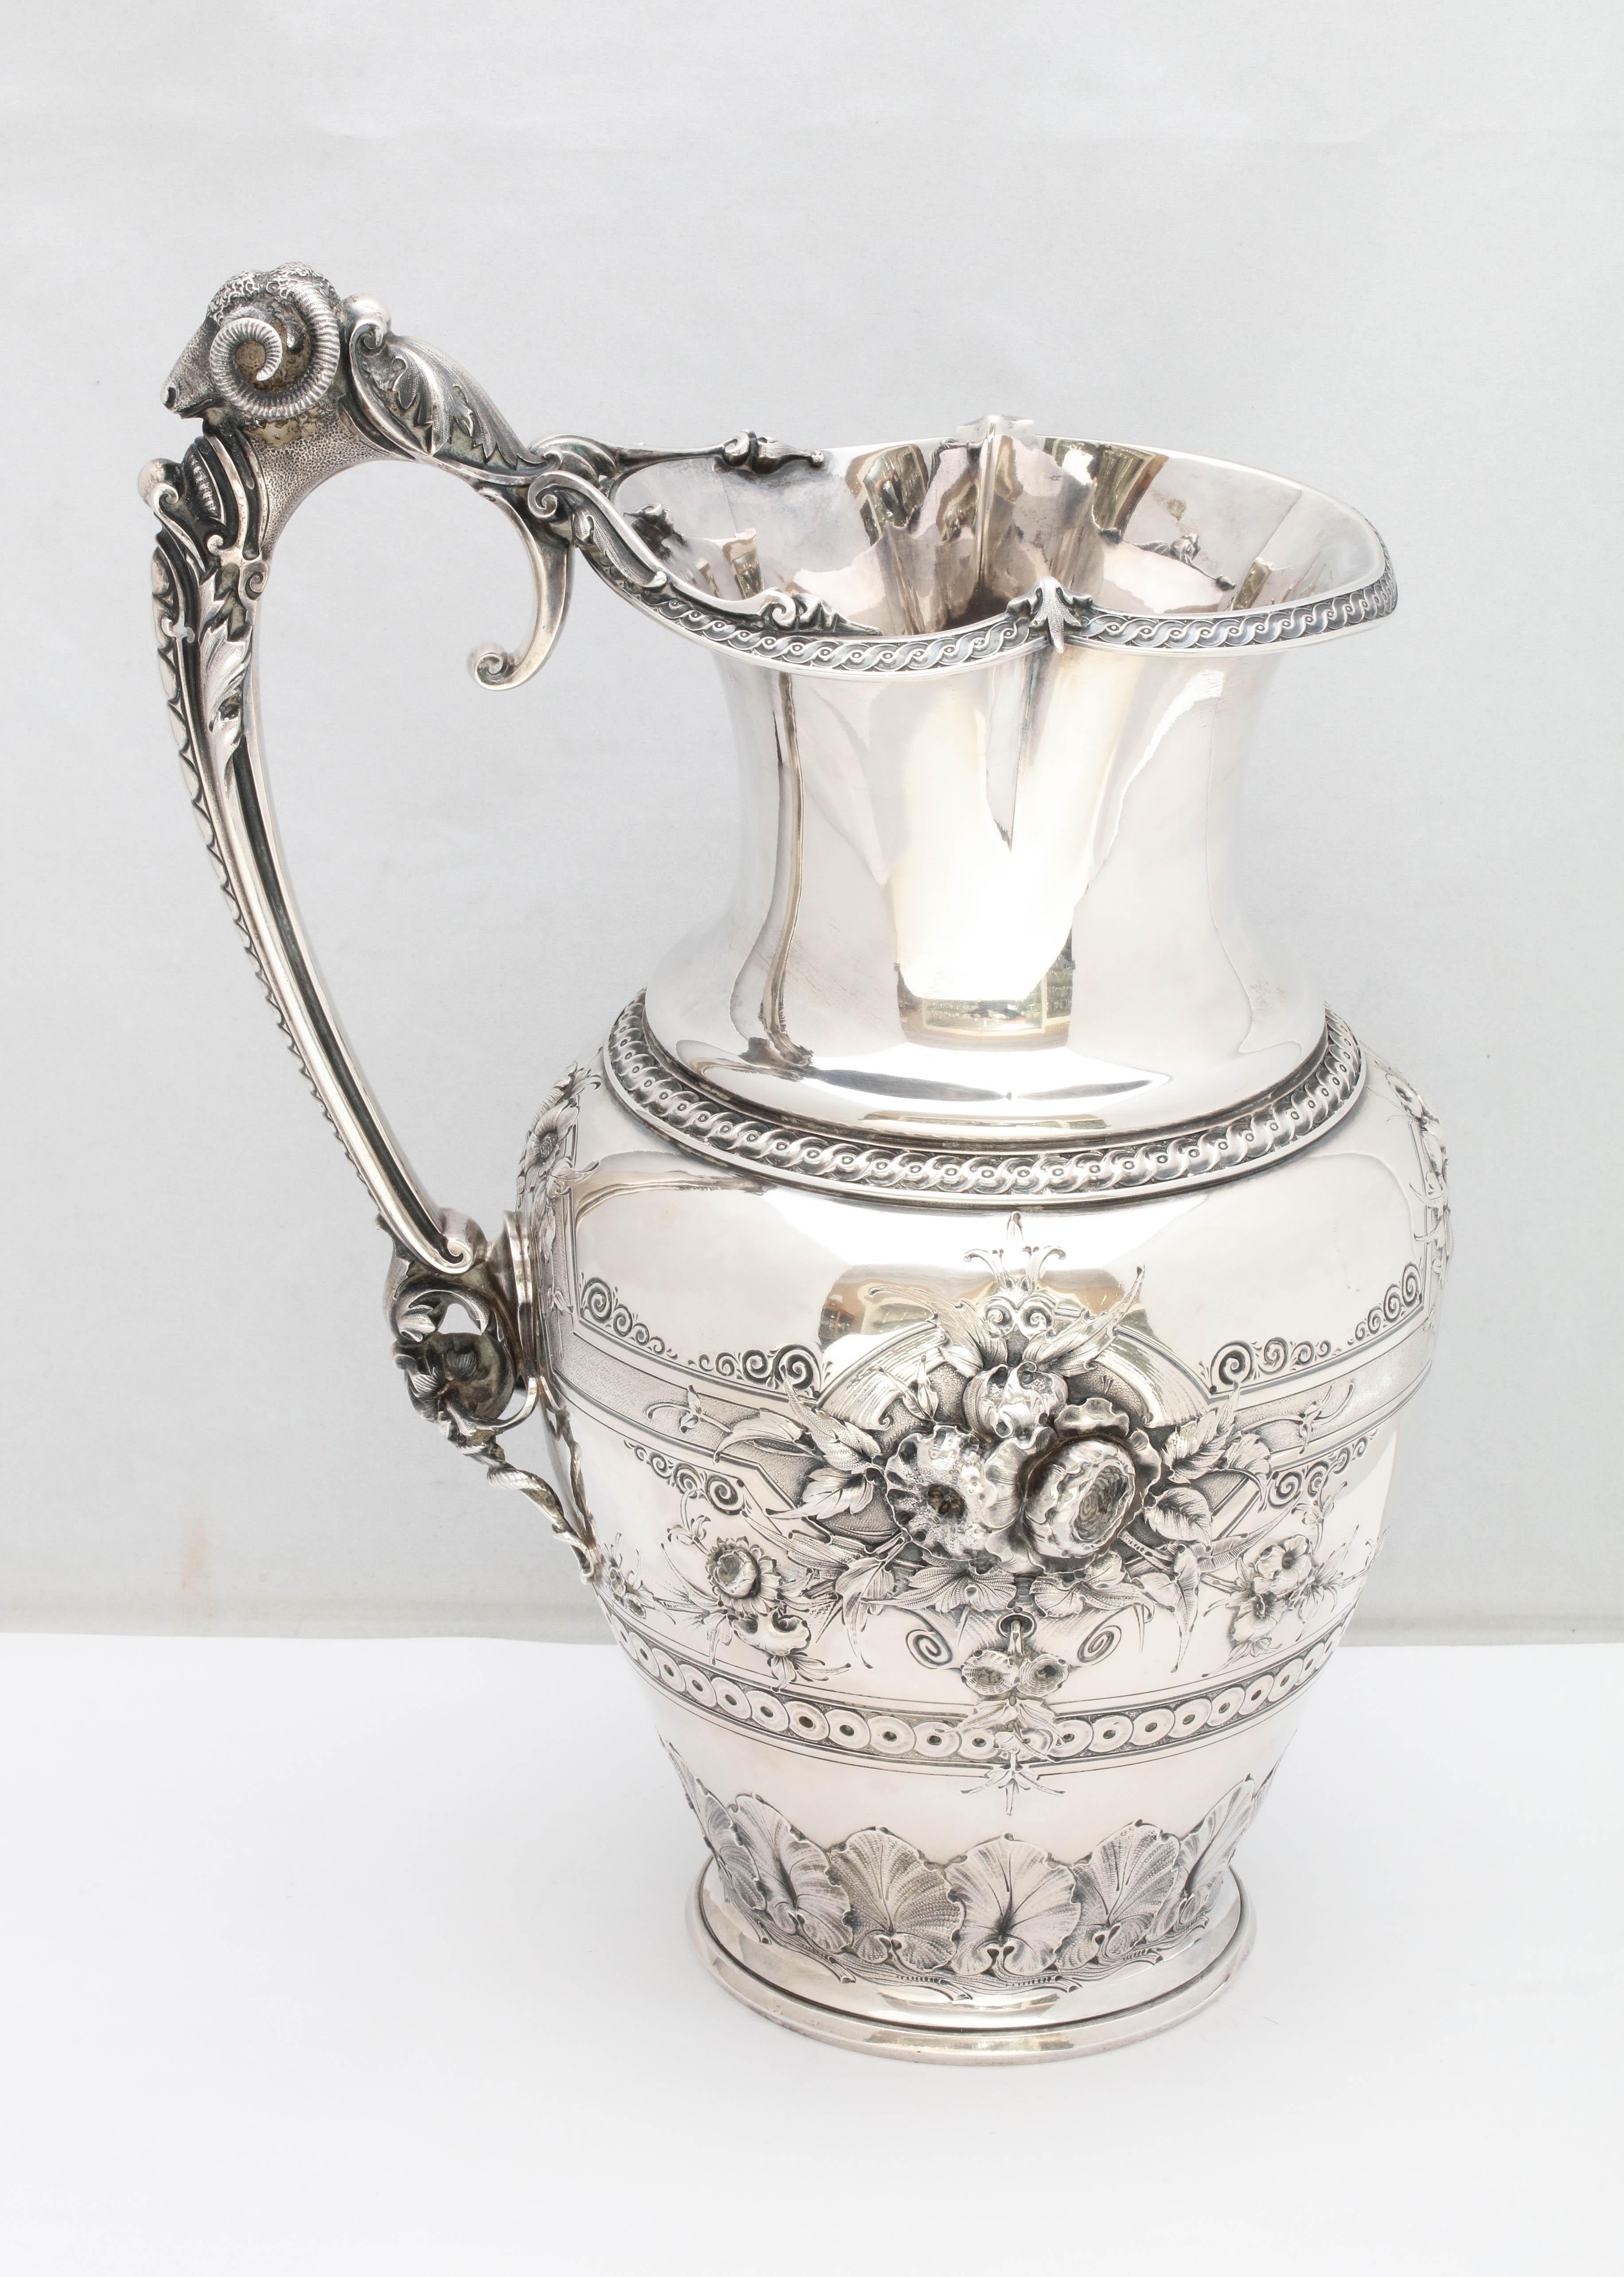 Large Neoclassical Coin Silver Pitcher by Gorham 1